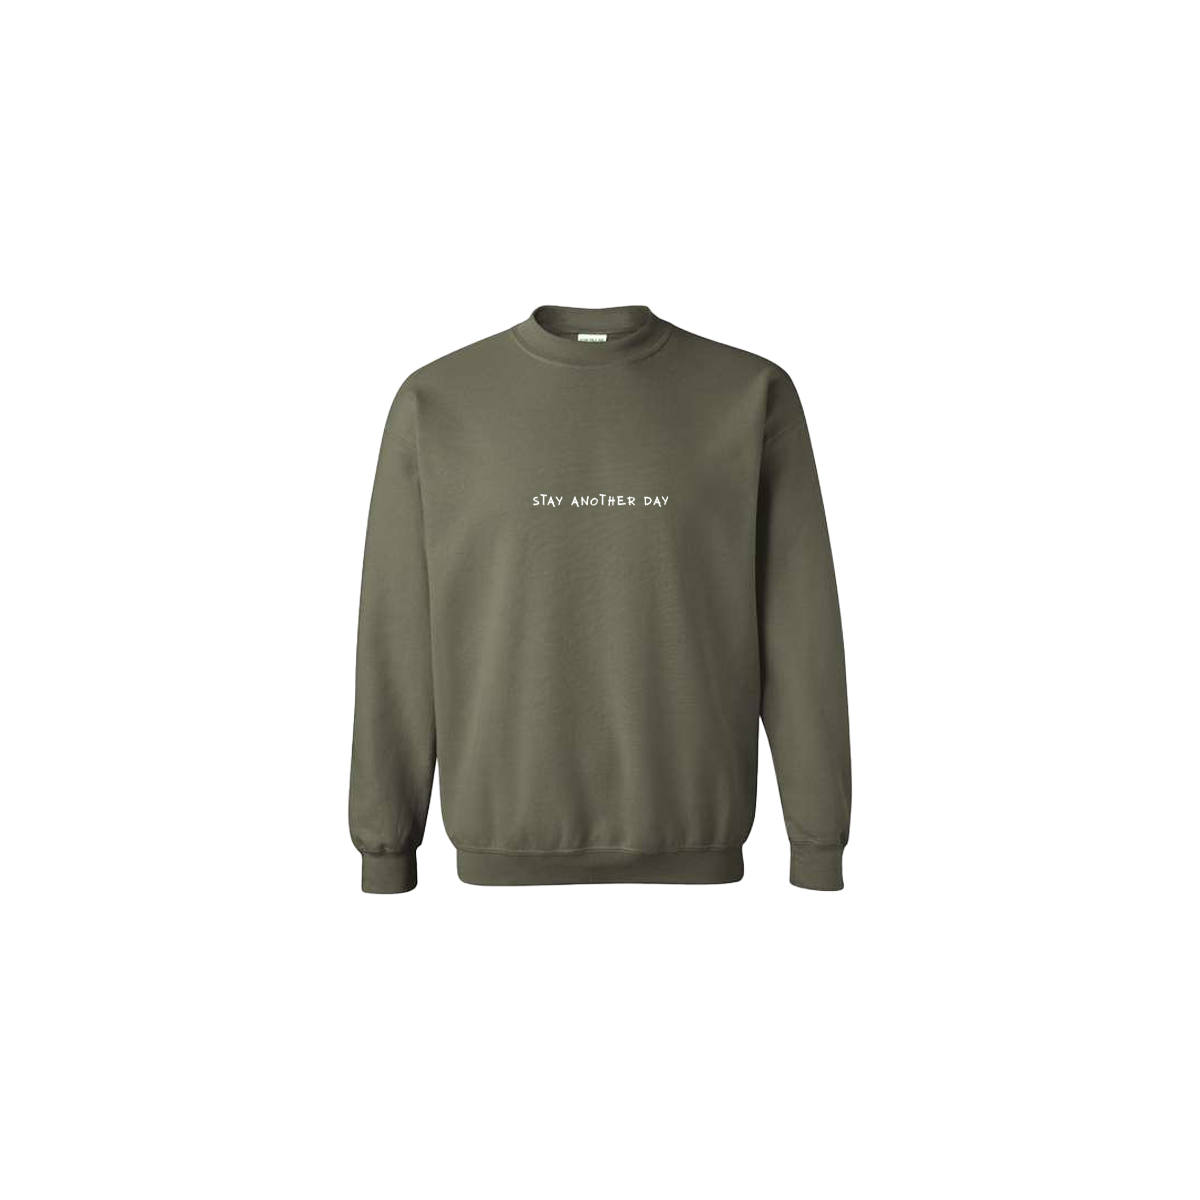 Stay Another Day Text Embroidered ArmyGreen Crewneck - Mental Health Awareness Clothing